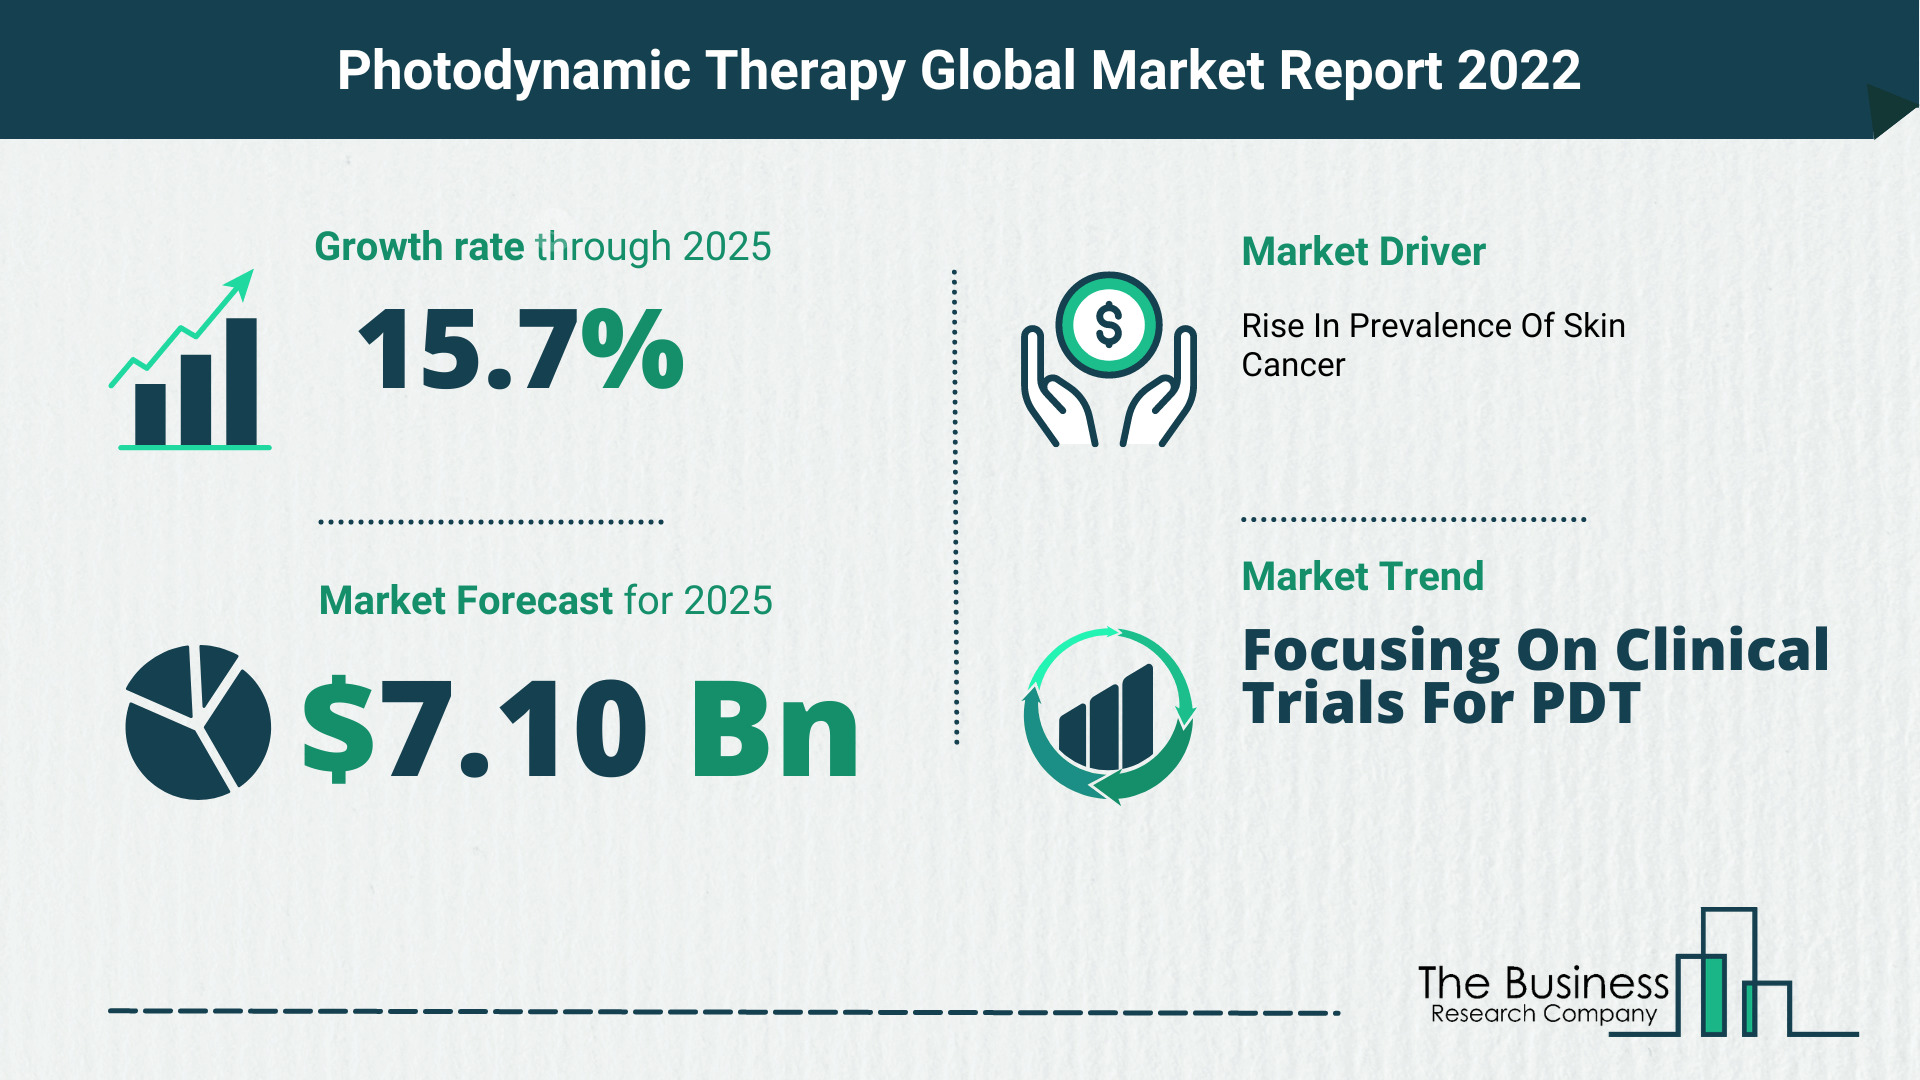 Latest Photodynamic Therapy Market Growth Study 2022-2026 By The Business Research Company